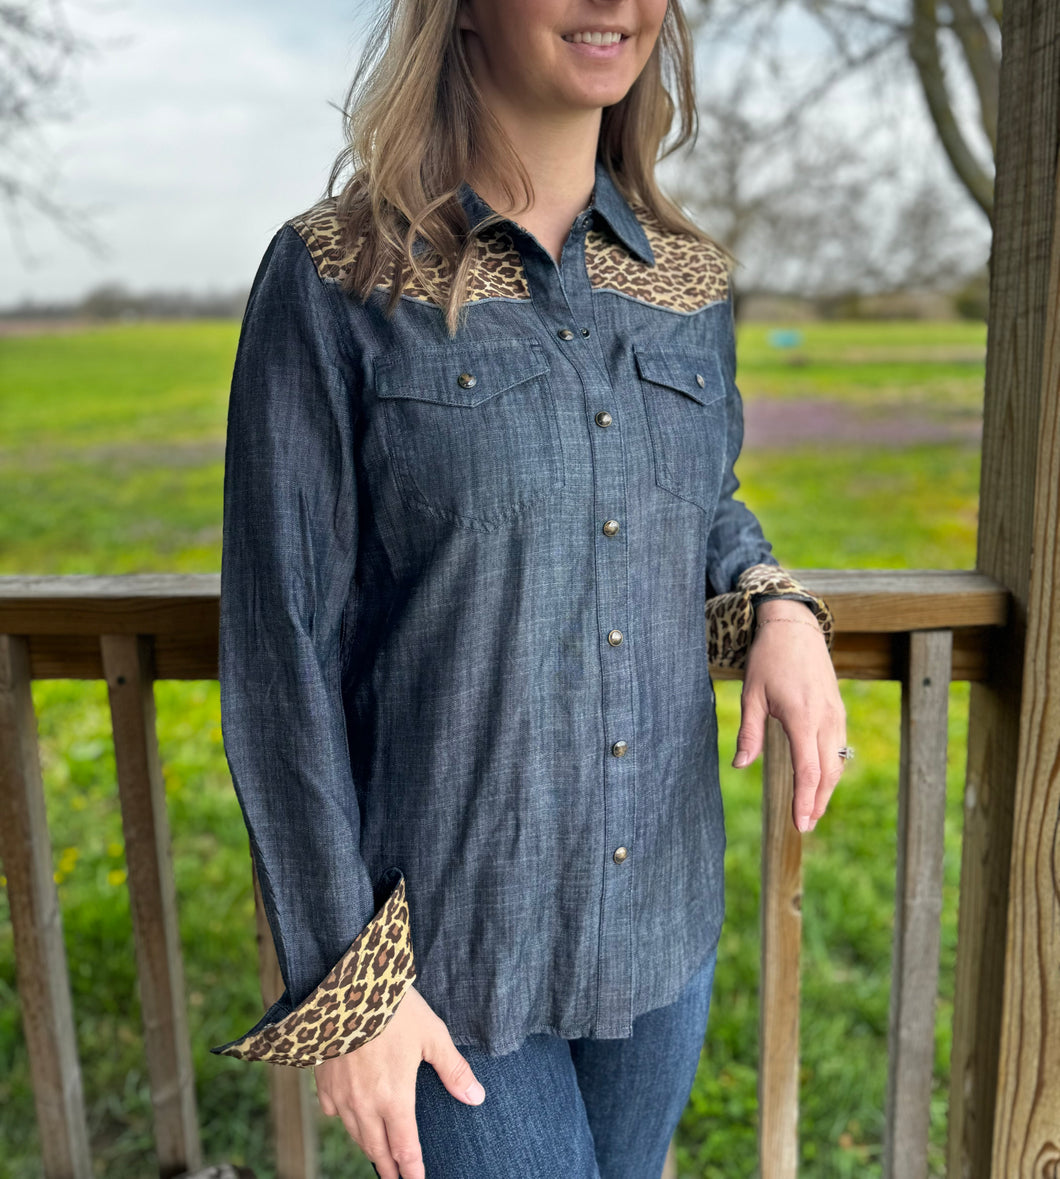 Layla Rose Rodeo Quincy Shirt by Ariat